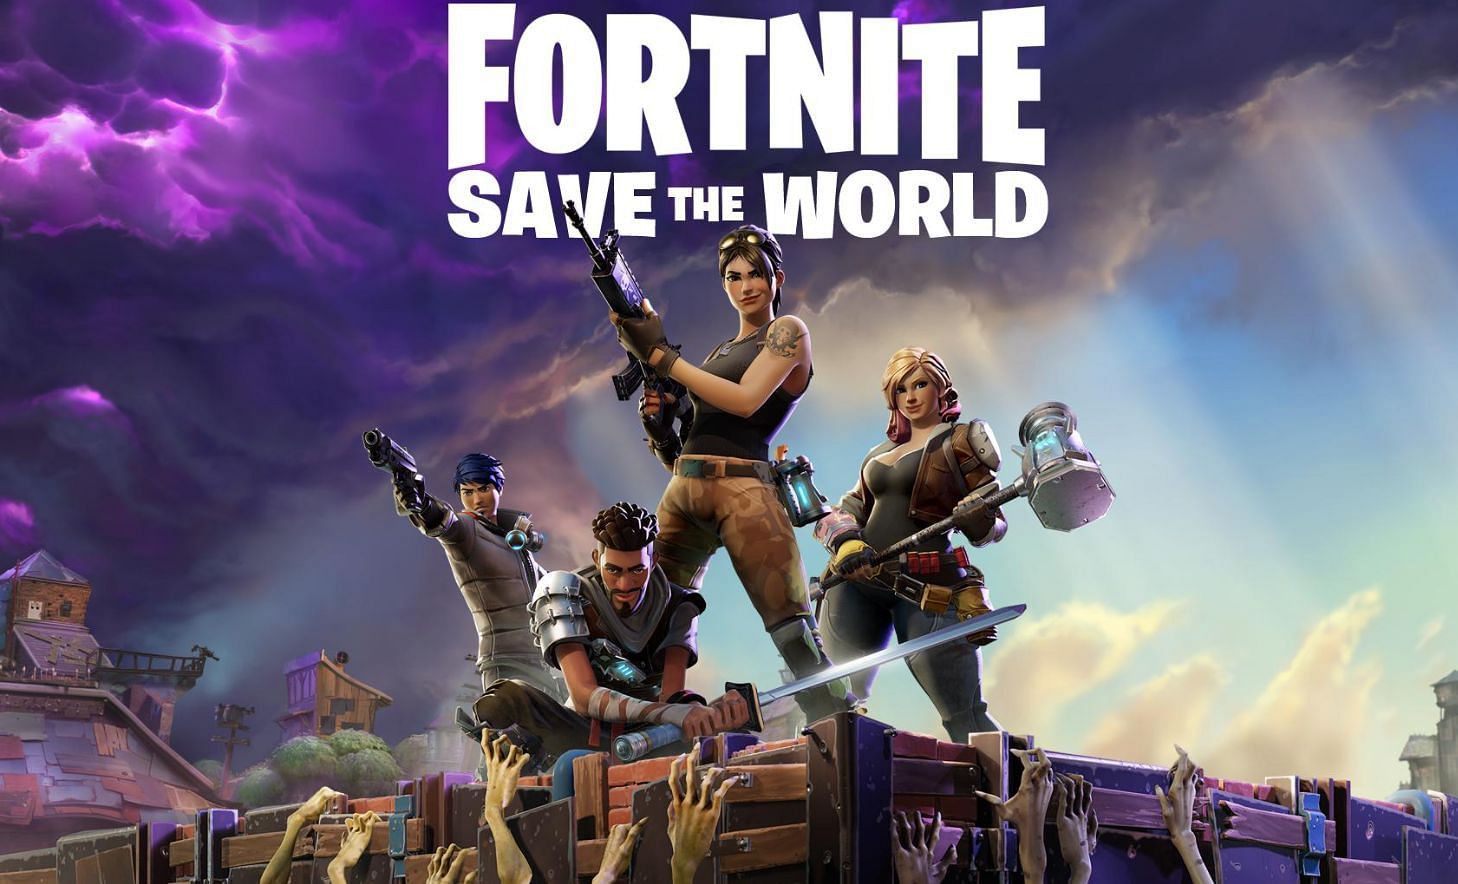 Fortnite Save the World in 2022 (Image via Epic Games)